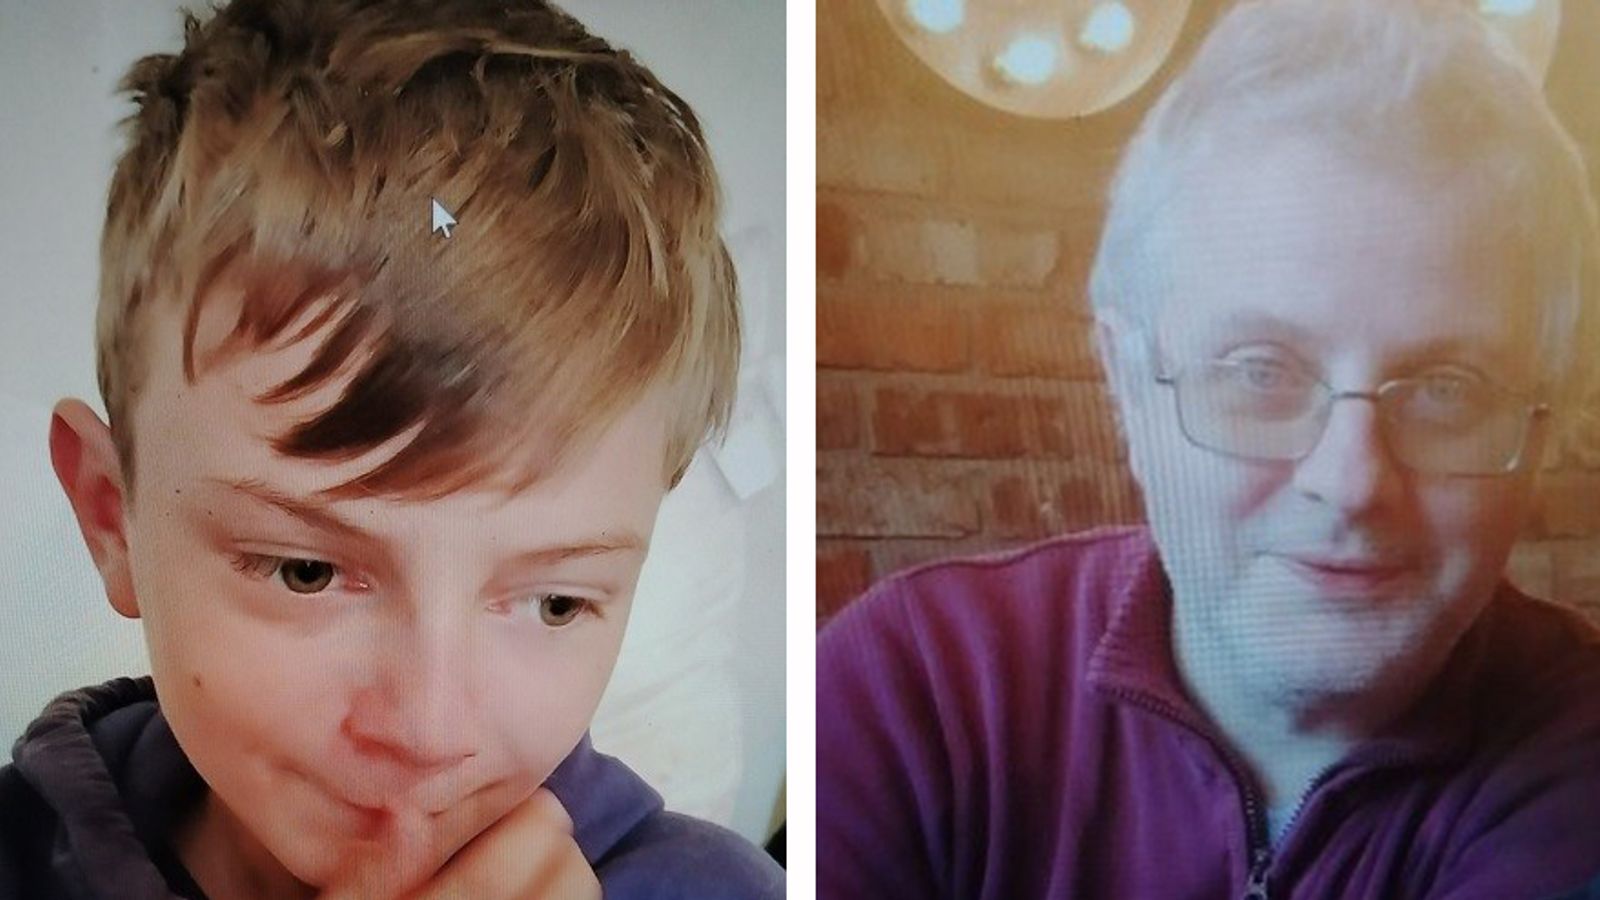 Police say 'caring' father and 'loving' son found dead after Scottish Highlands hike likely died in fall